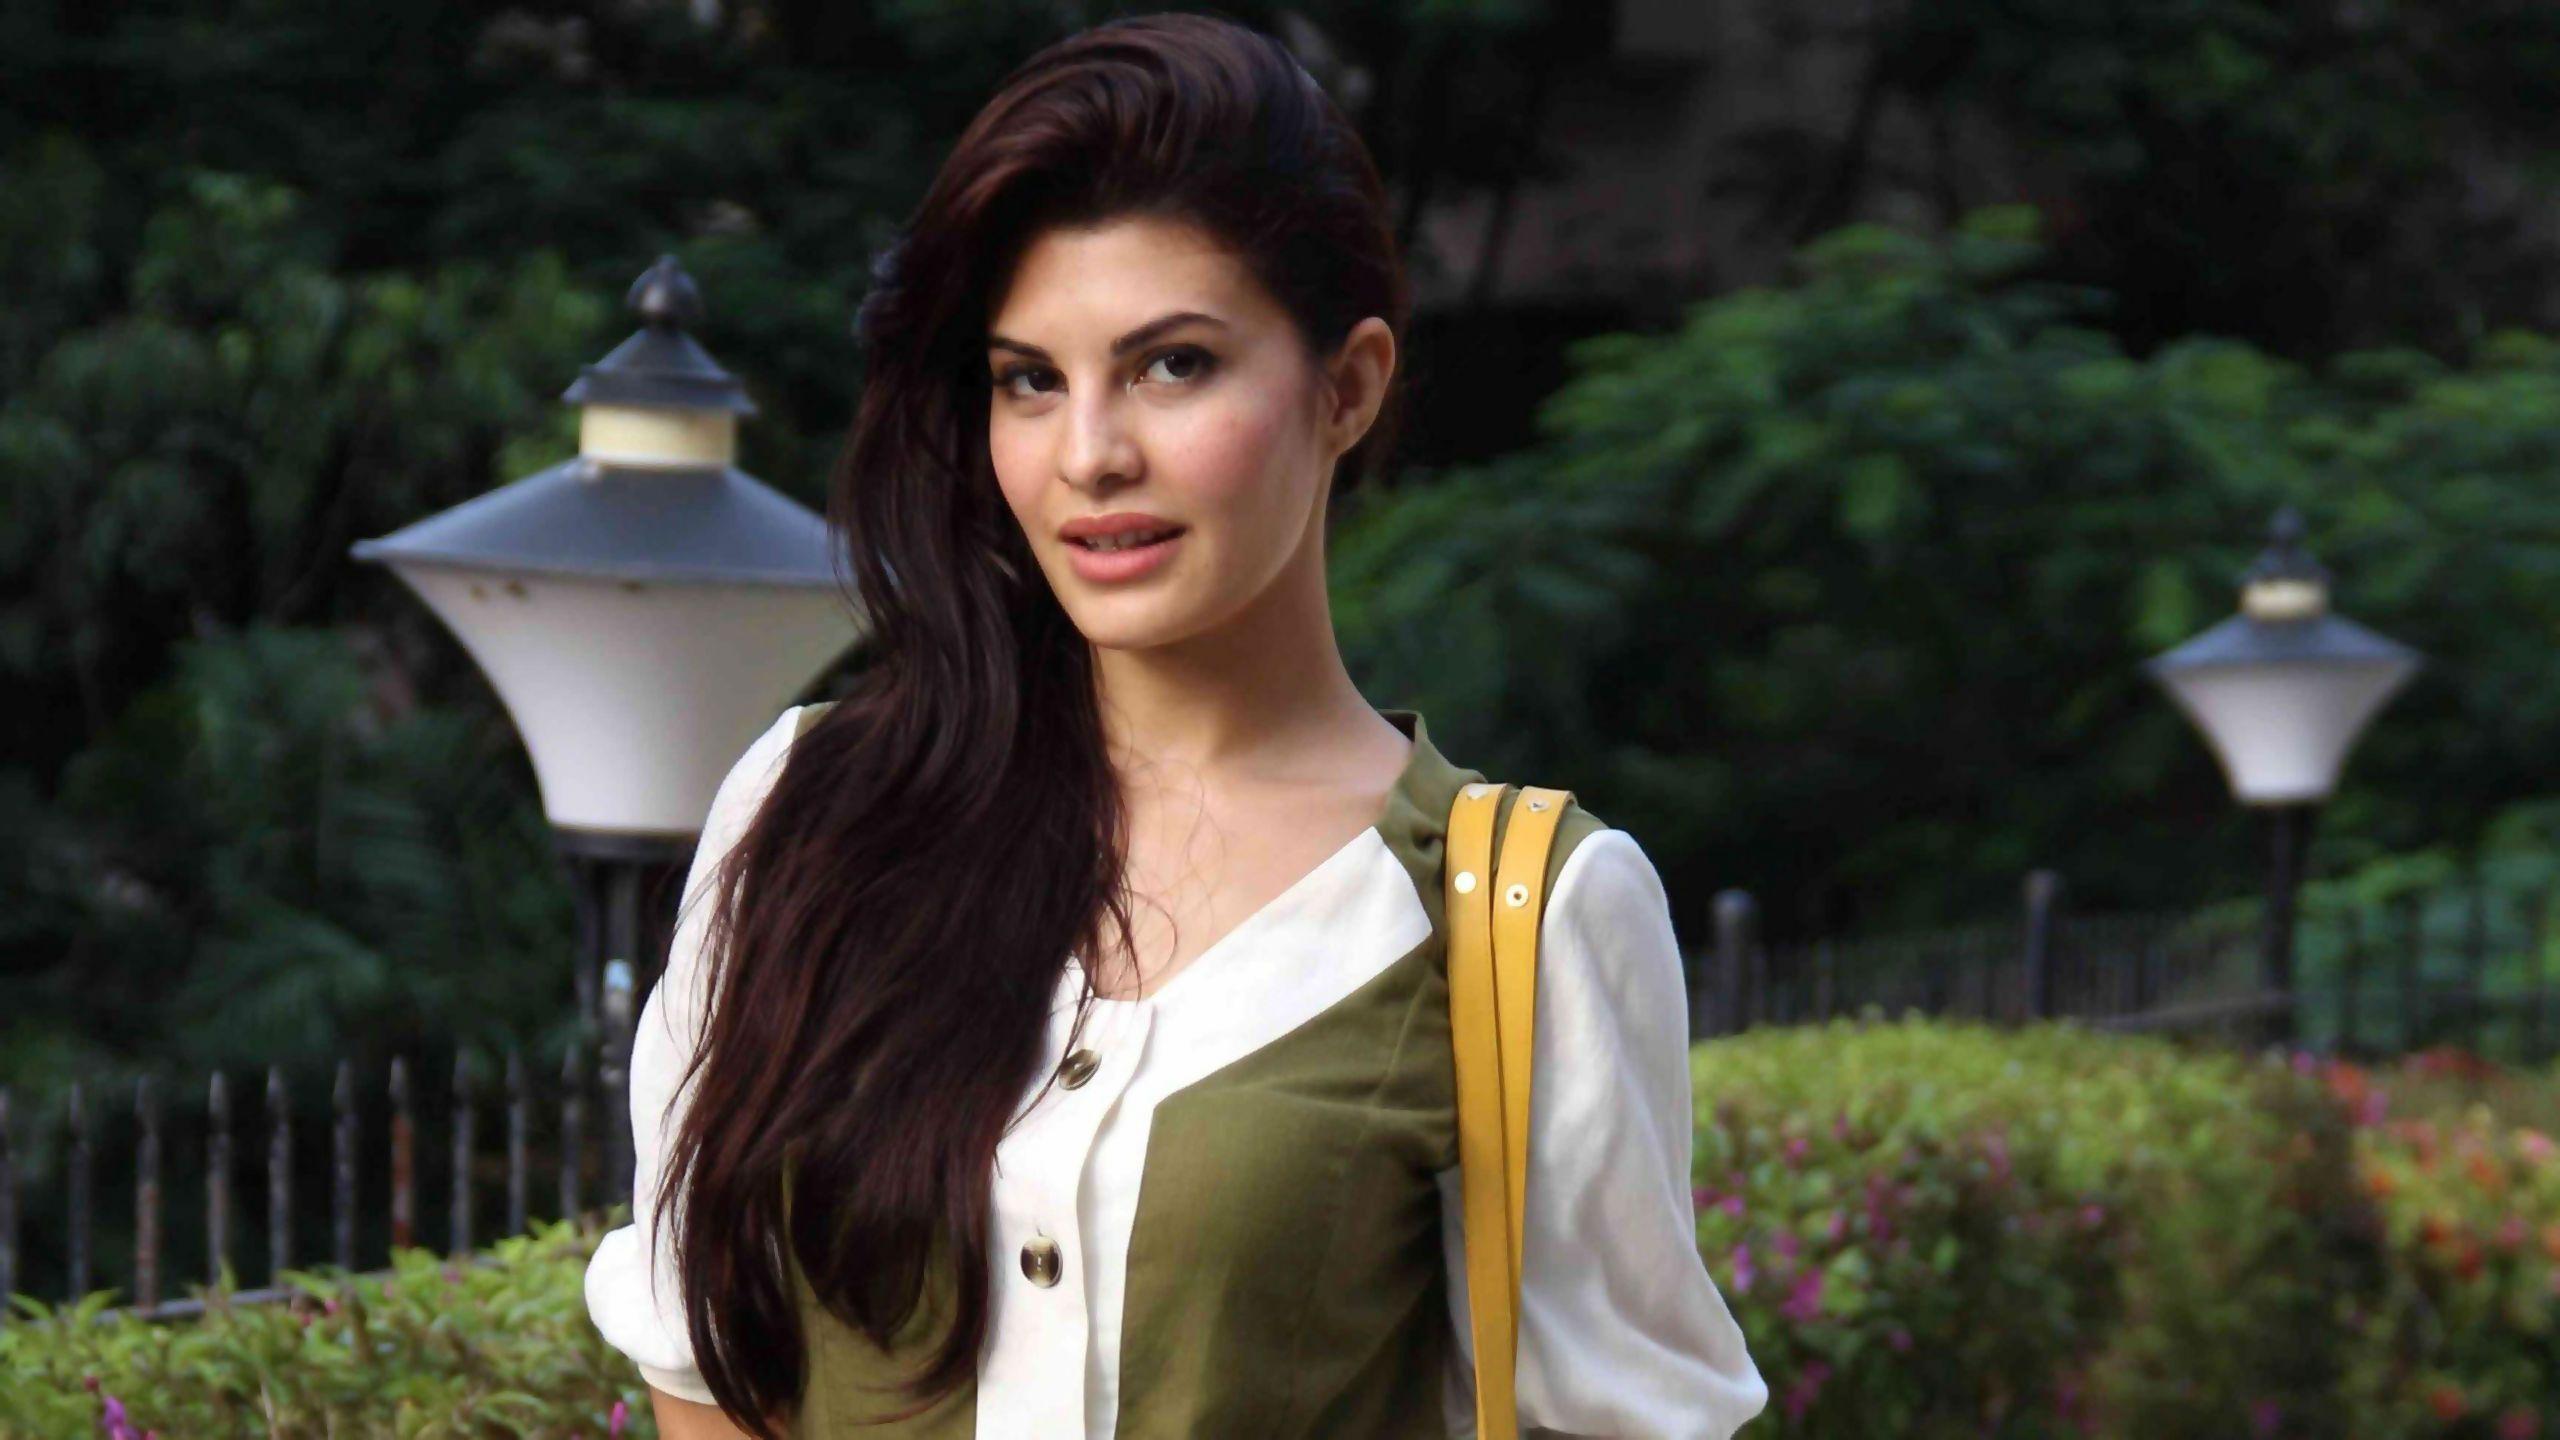 Out and About. Bollywood wallpaper, Jacqueline fernandez